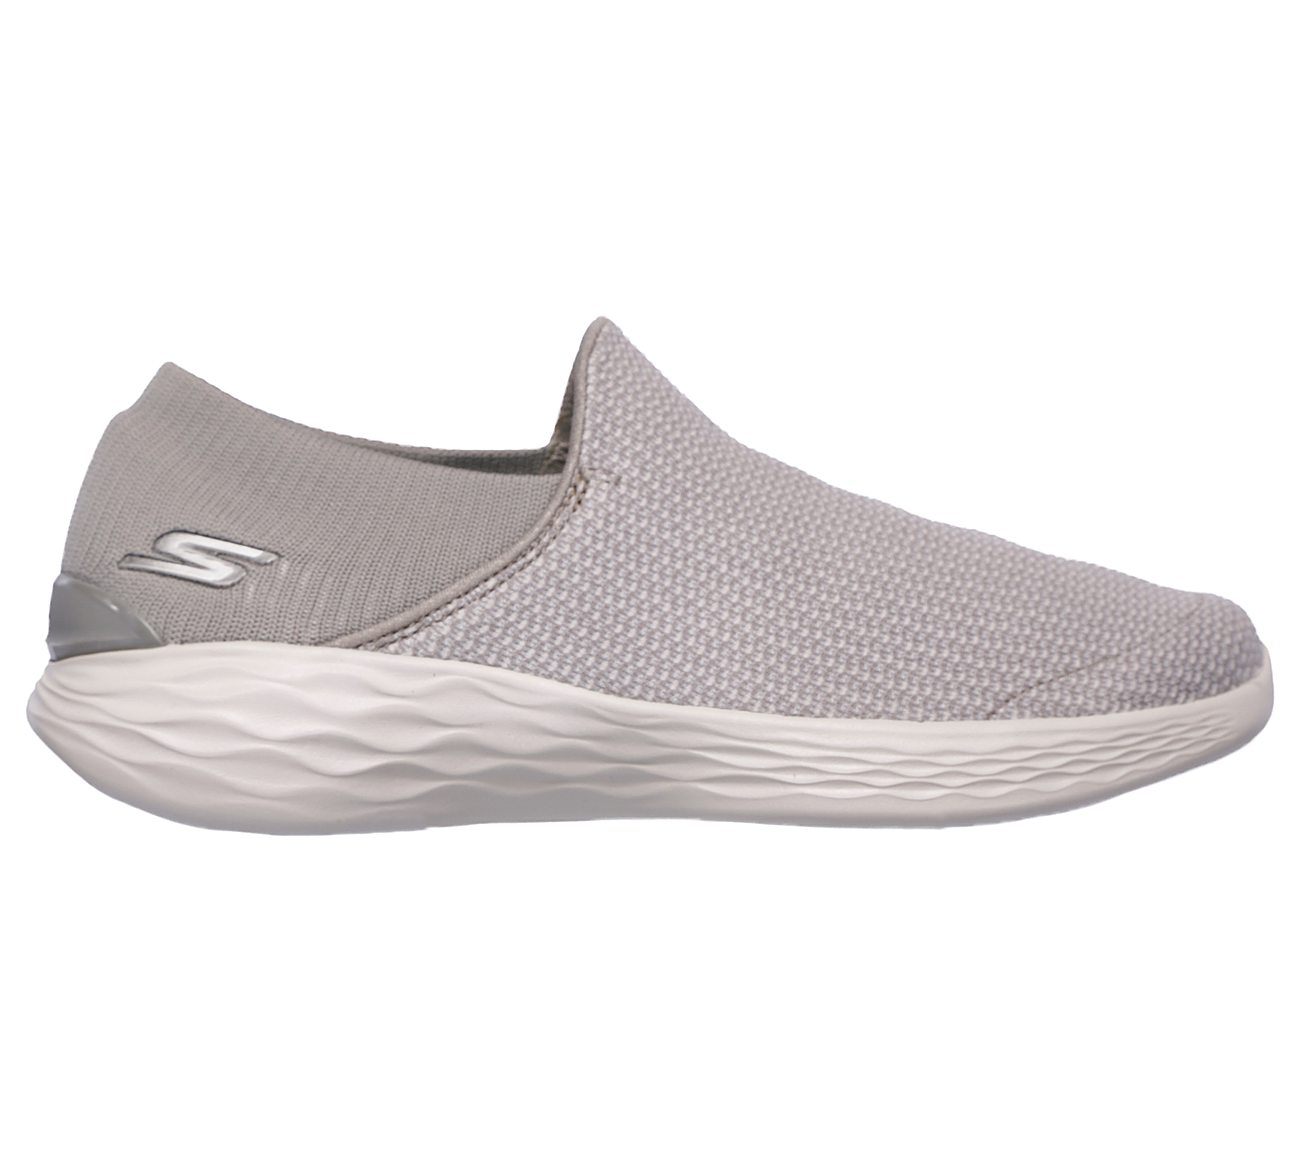 where can i buy skechers slip on shoes